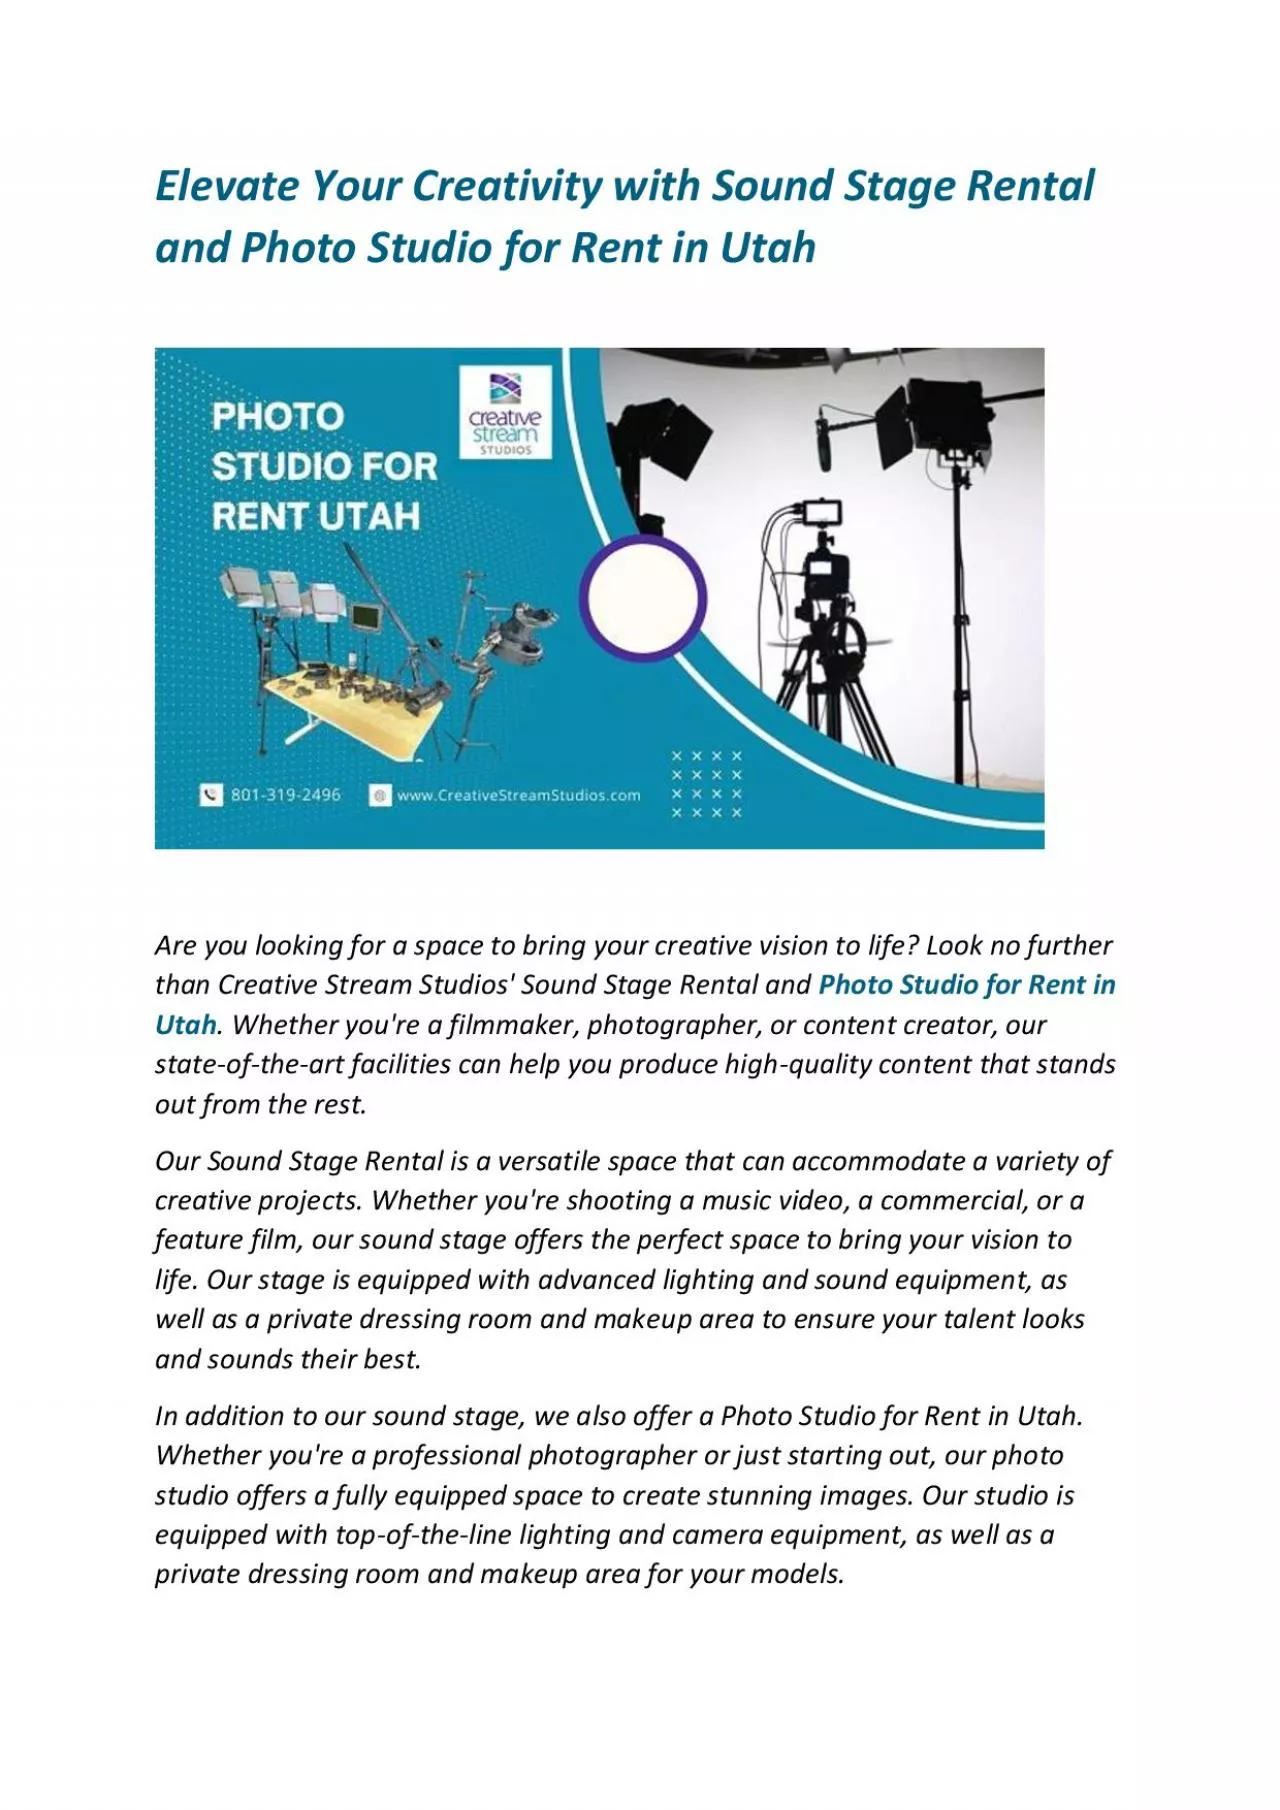 Elevate Your Creativity with Sound Stage Rental and Photo Studio for Rent in Utah